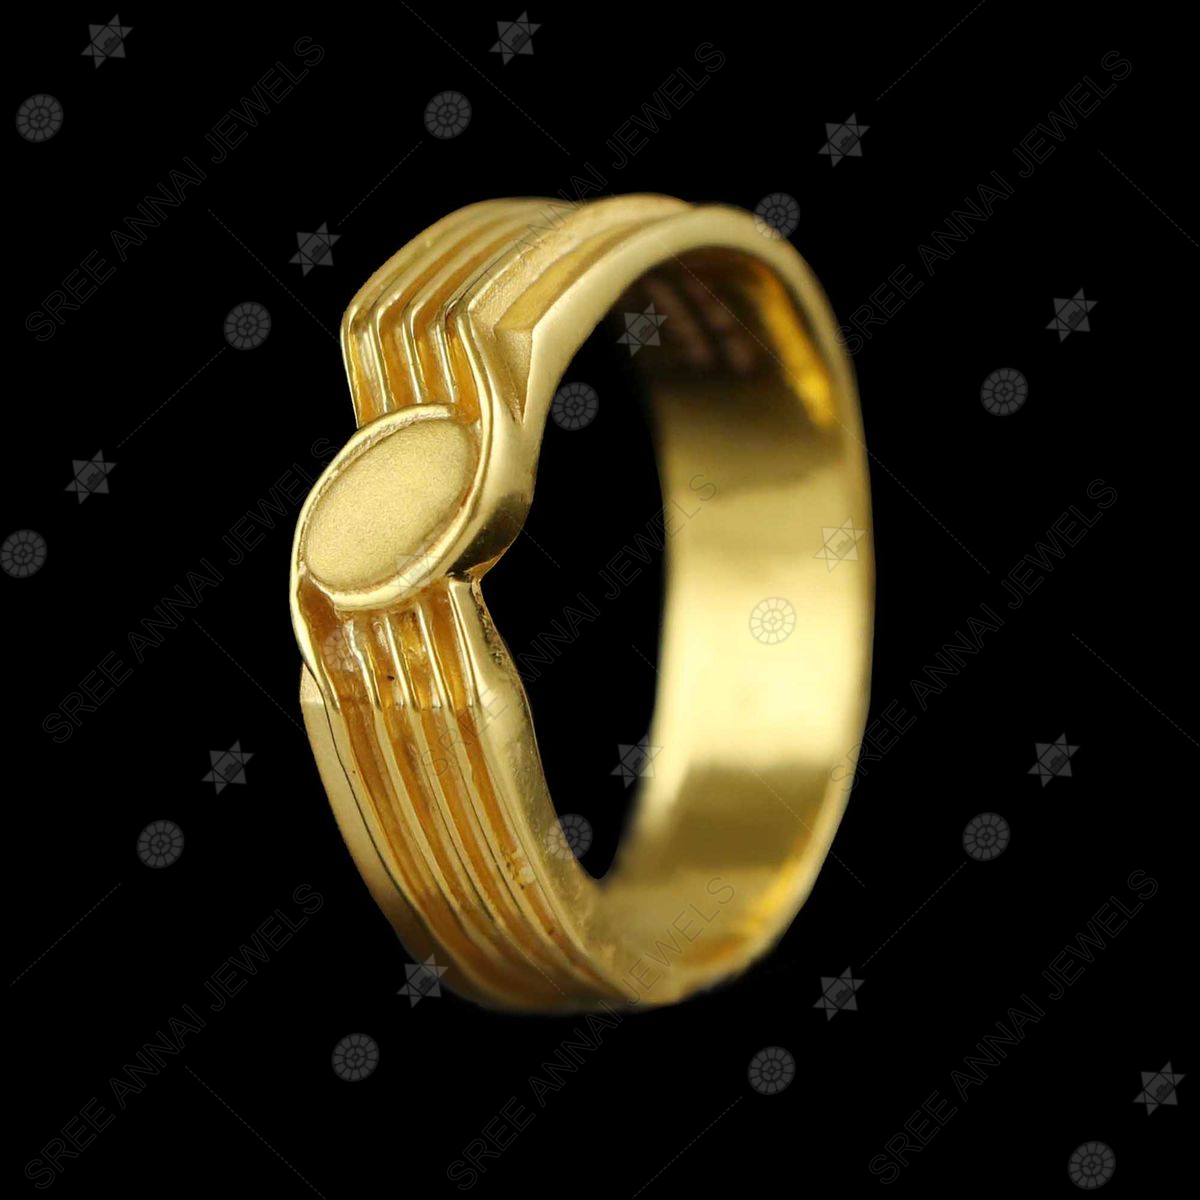 Handmade Rustic Gold Wedding Band Brushed Matte Finish 22ct 22kt Recycled  Solid Gold Ring 3mm Wide - Etsy